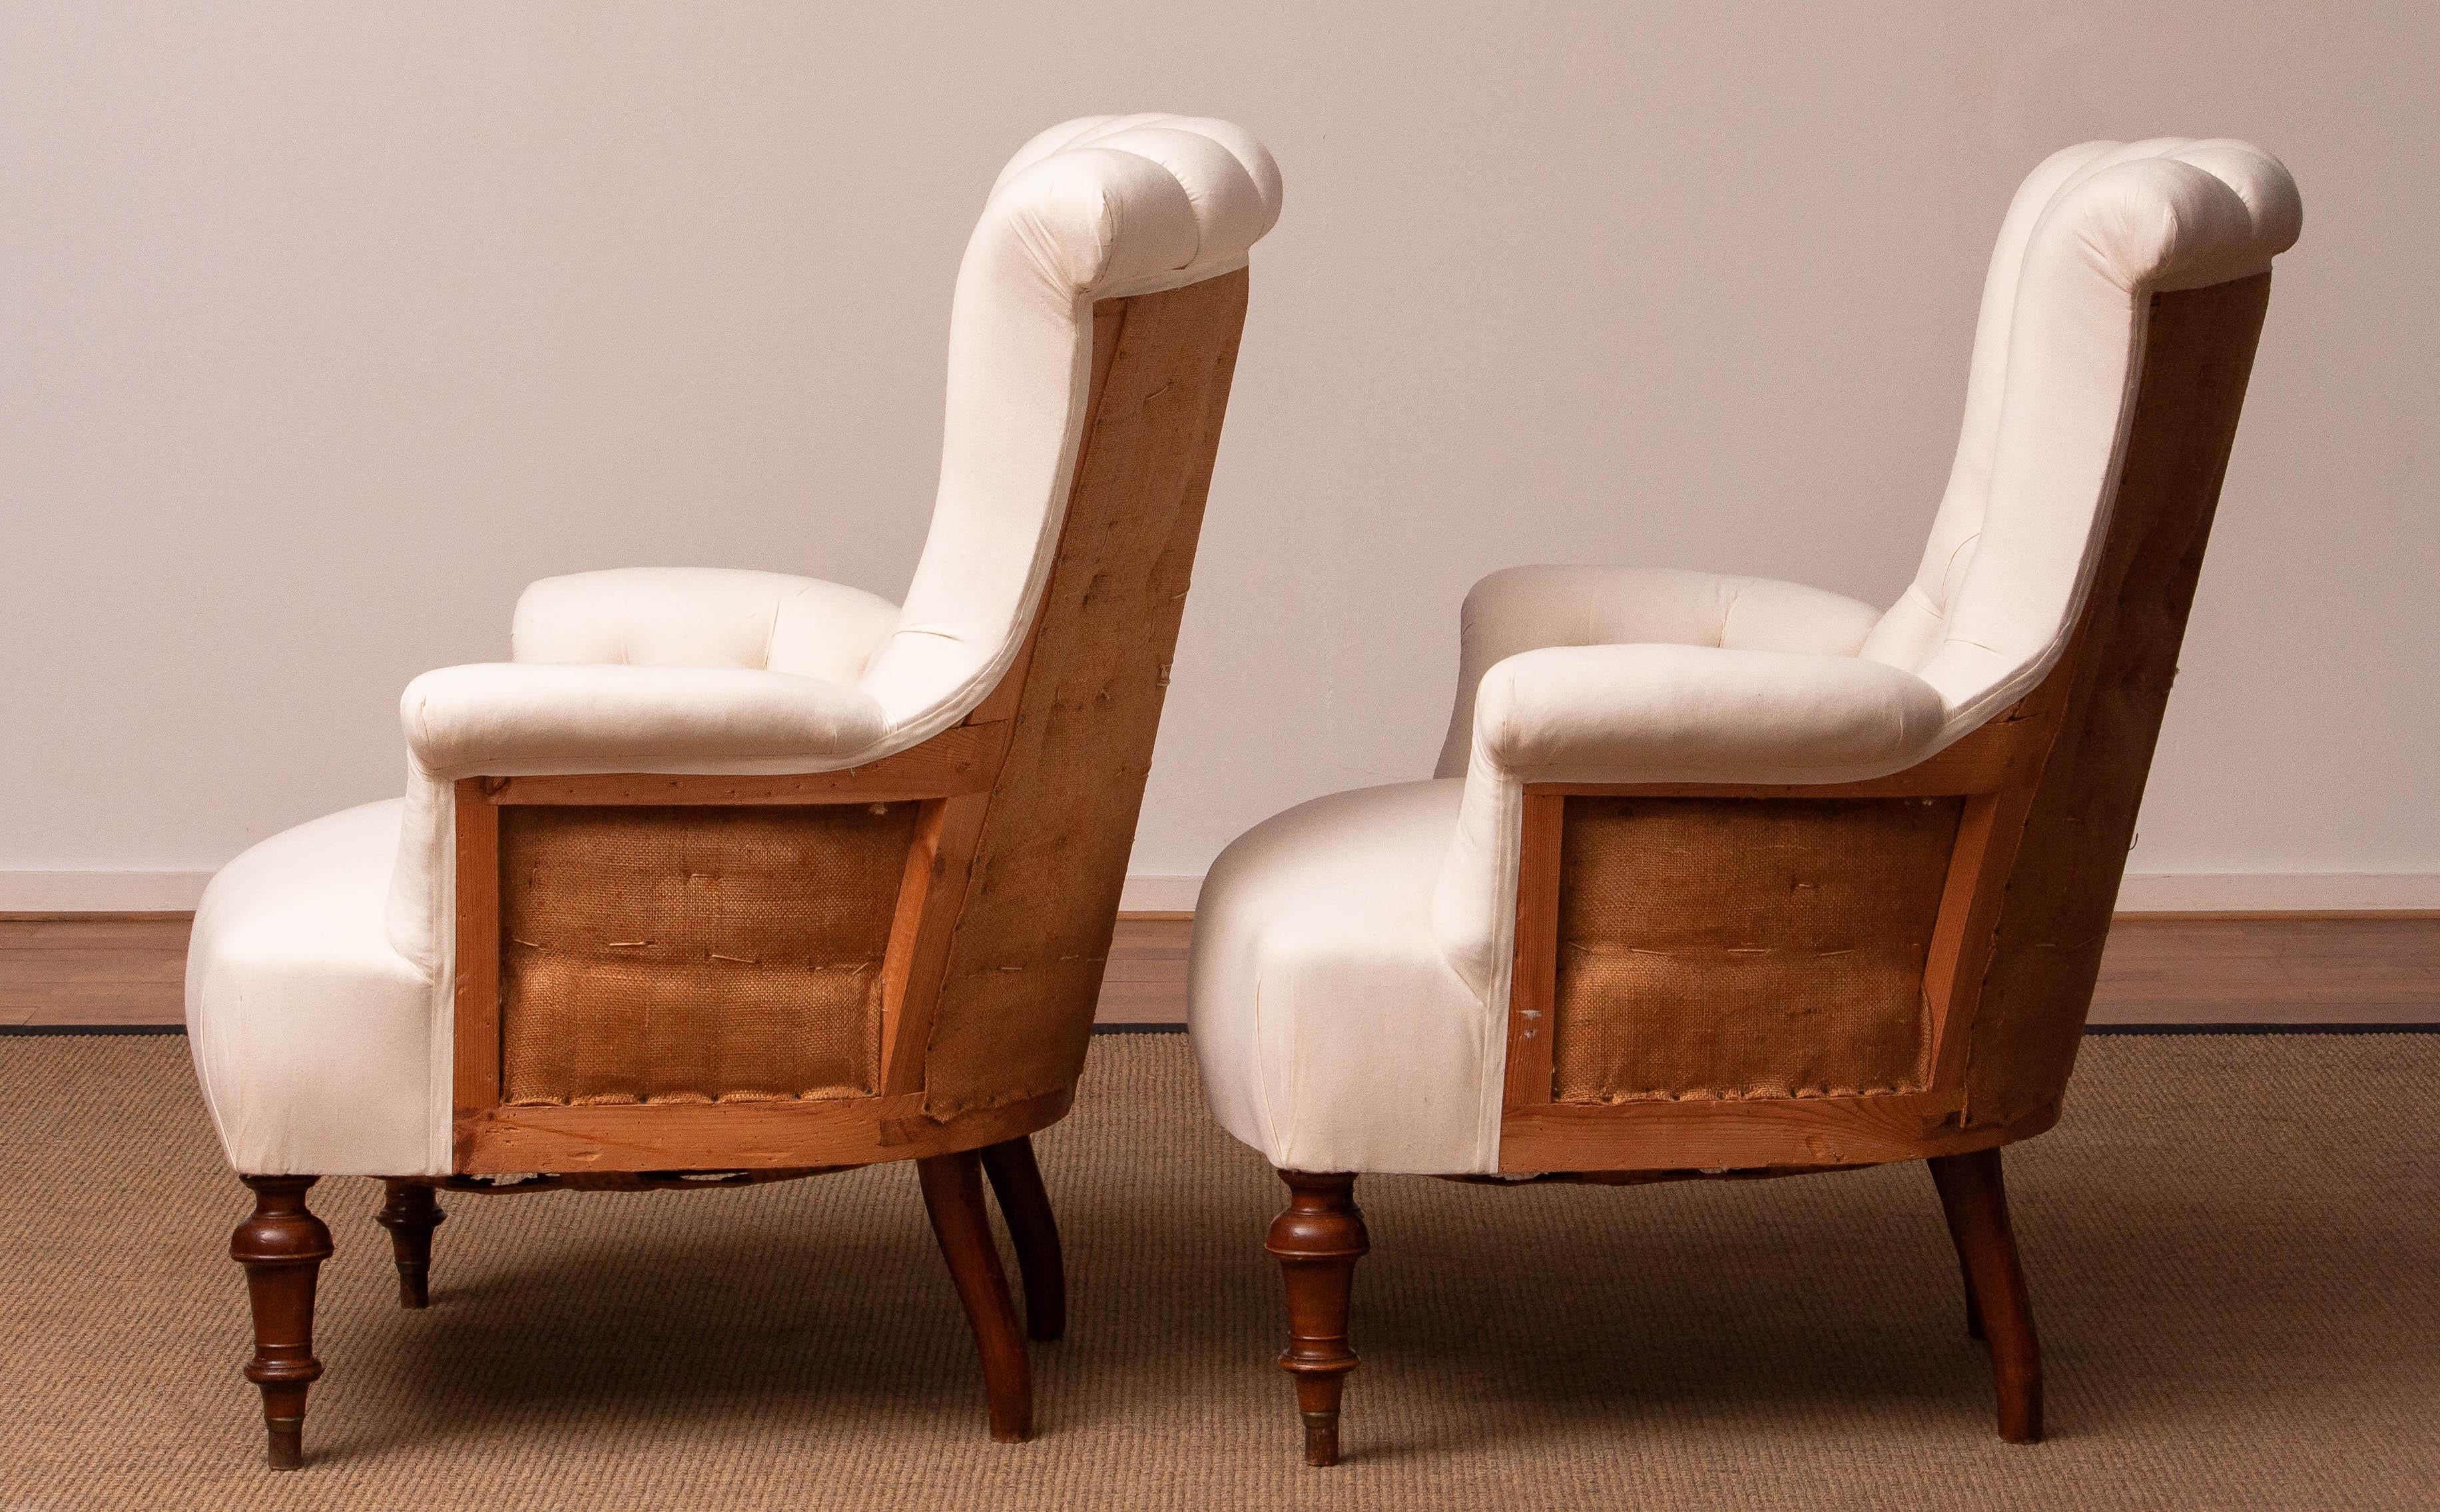 Pair Domestic Cotton Victorian 'Deconstructed' Tufted Scroll-back Chair, 1900 For Sale 2